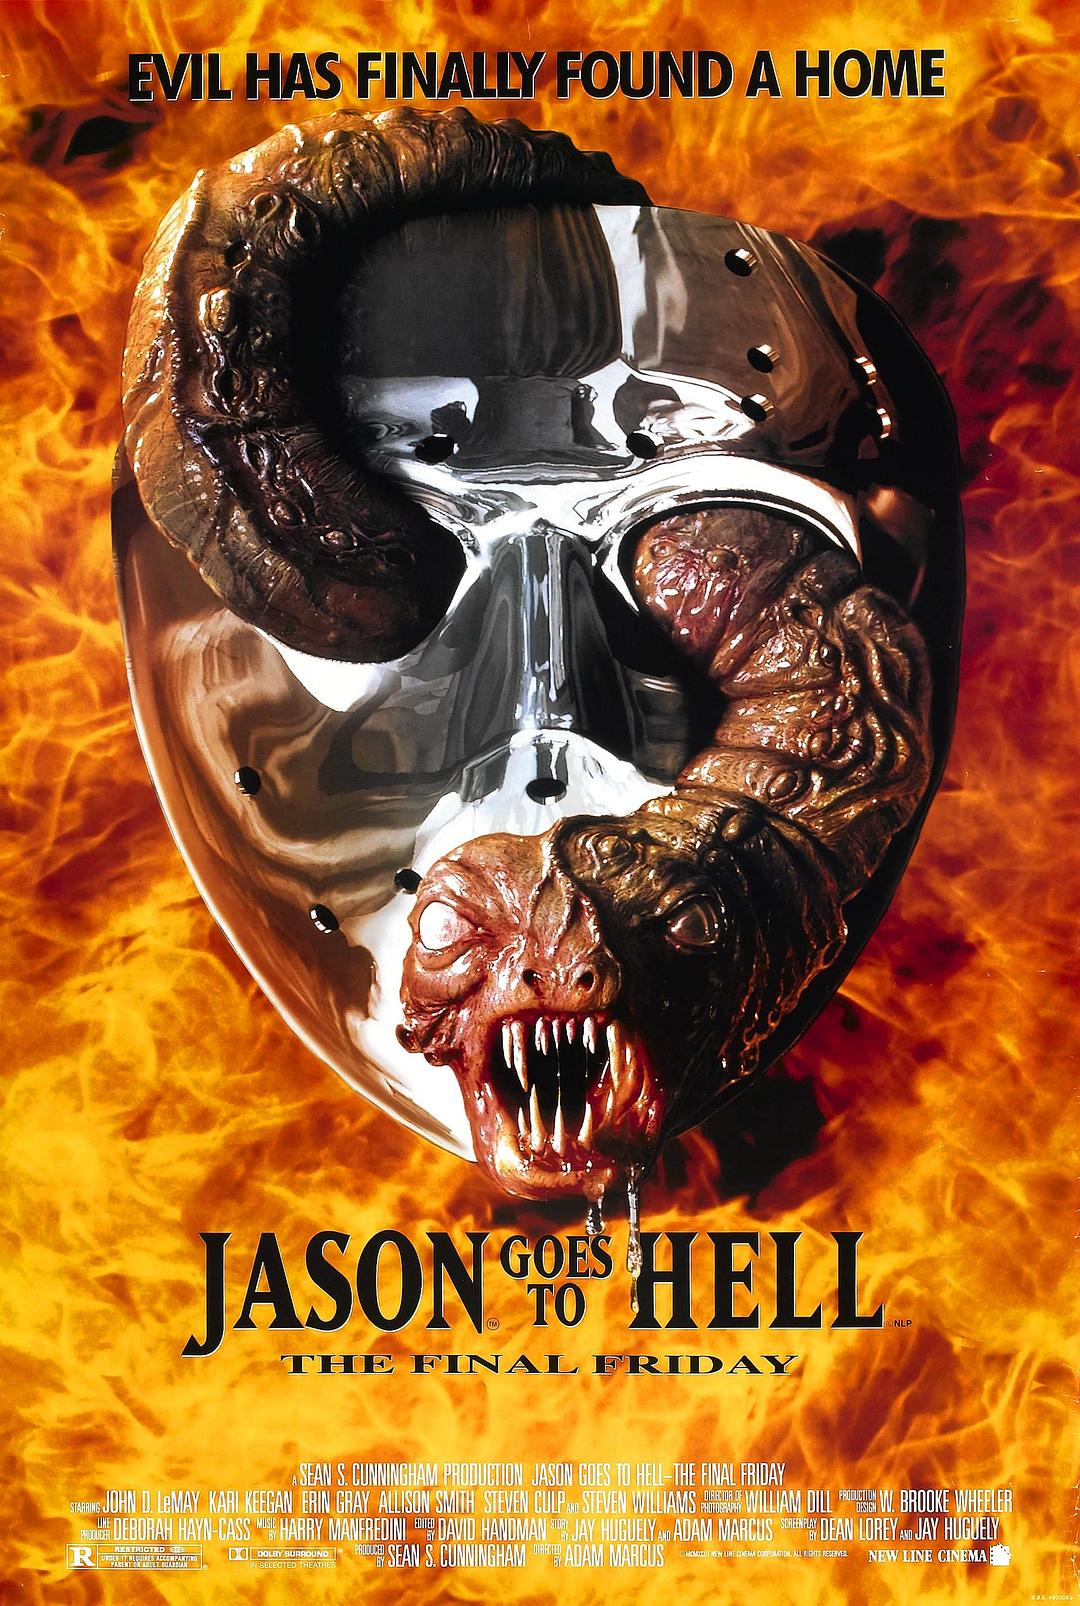 ʮ9 Jason.Goes.To.Hell.The.Final.Friday.1993.1080p.BluRay.x264-LiViDiTY 6.55-1.png